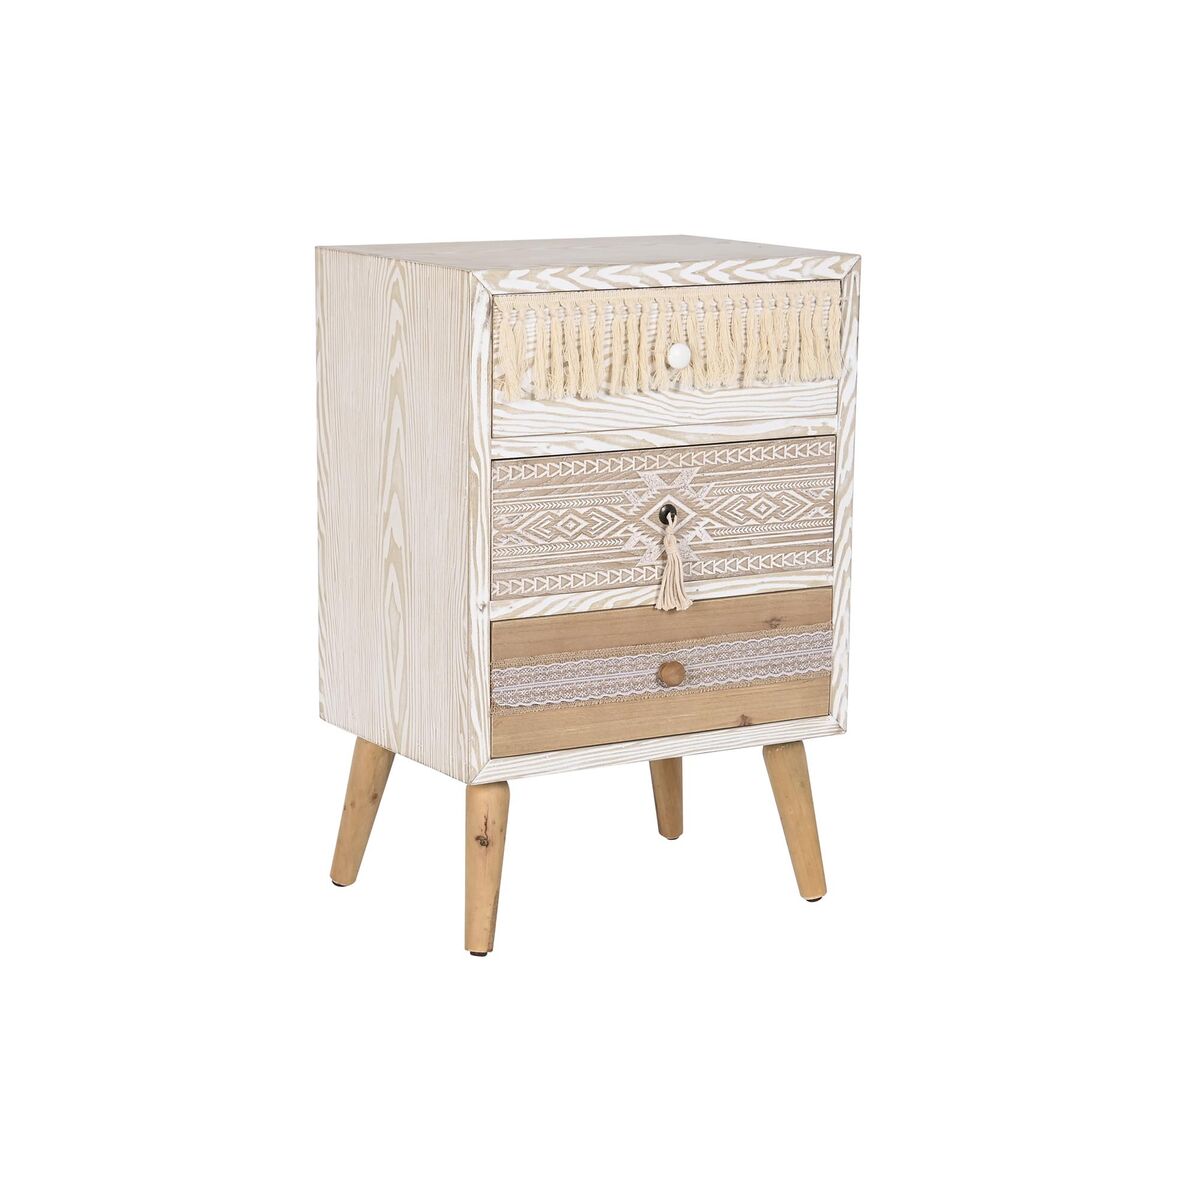 Boho Bedside Table in Fir Wood with 3 Drawers (48 x 35 x 72 cm)